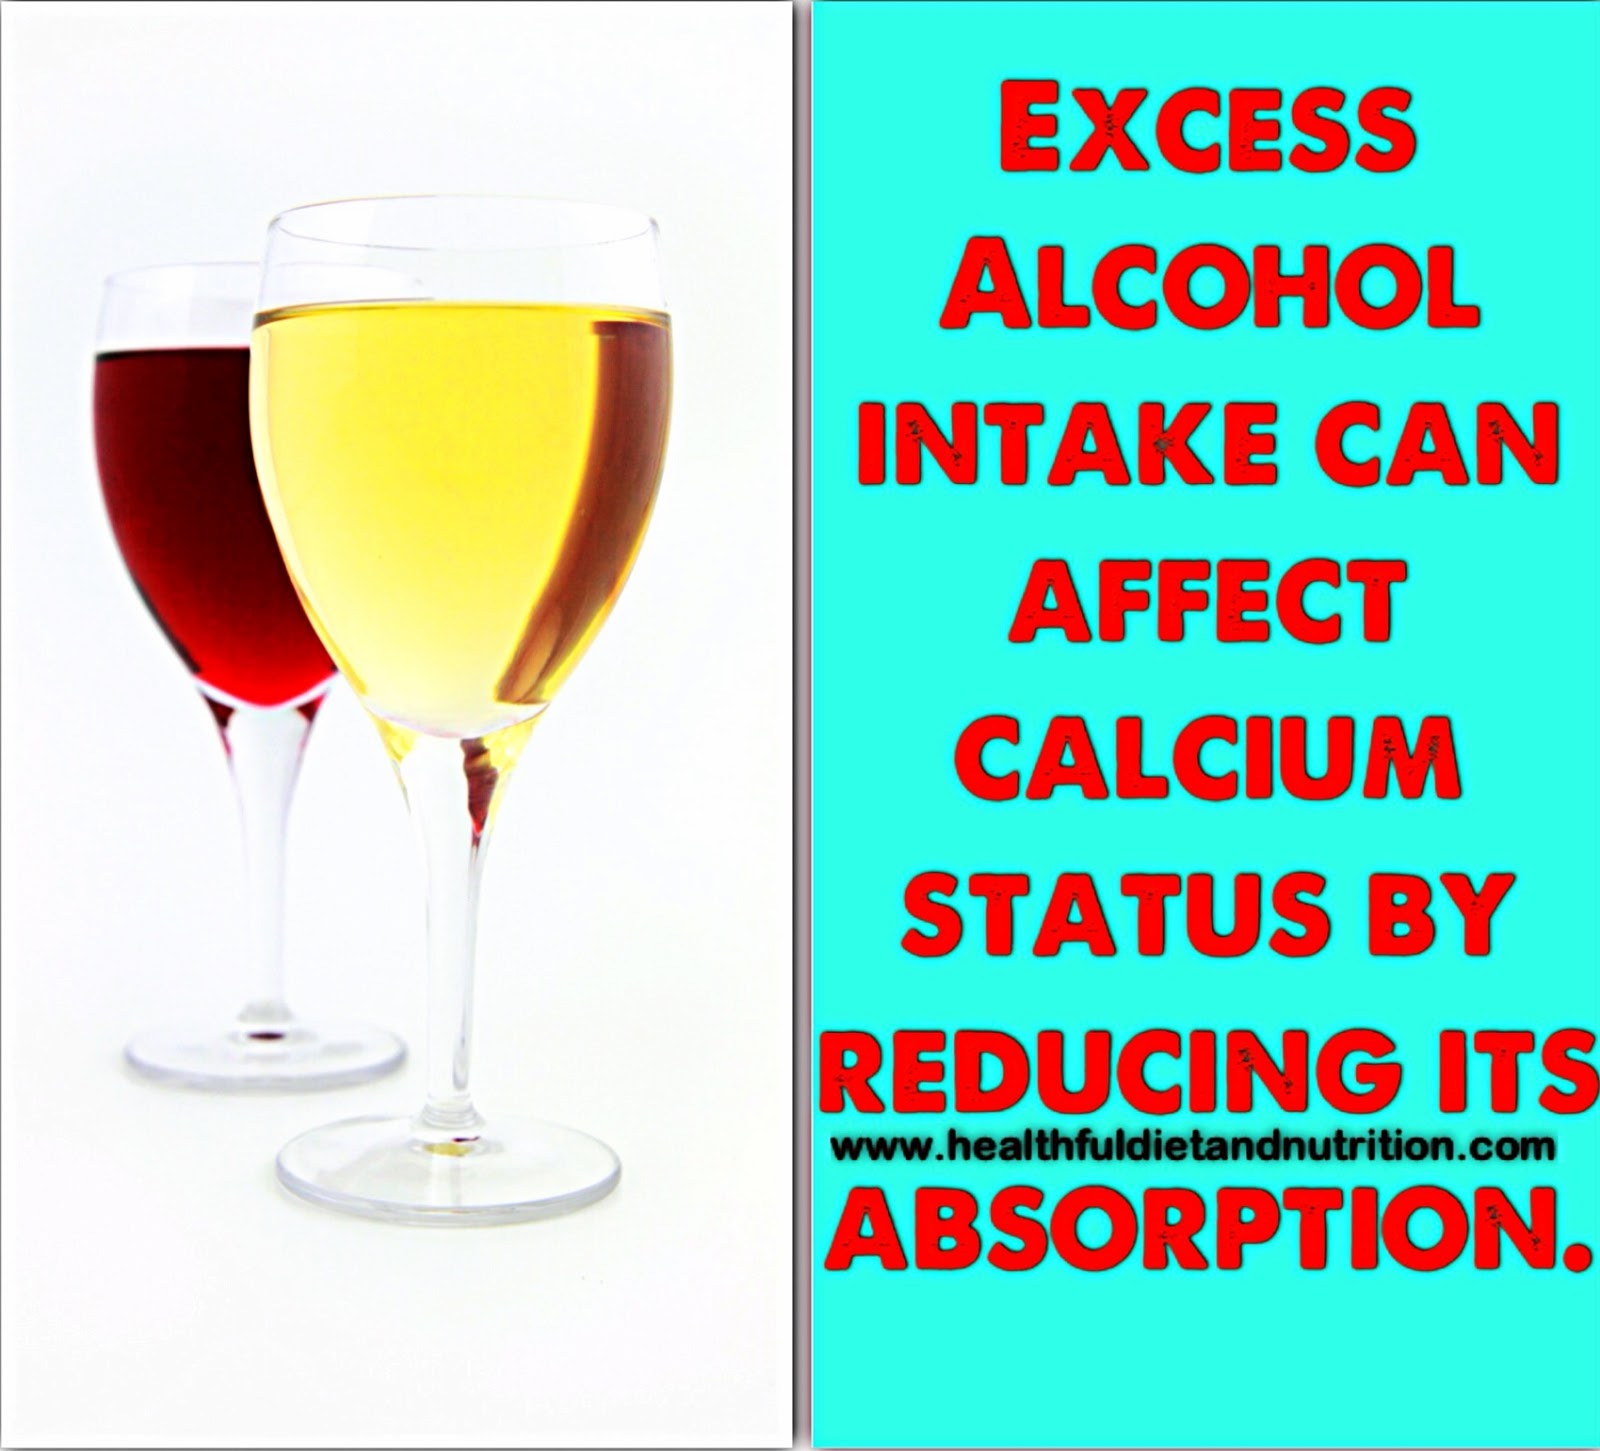 Excess Alcohol Intake and Calcium